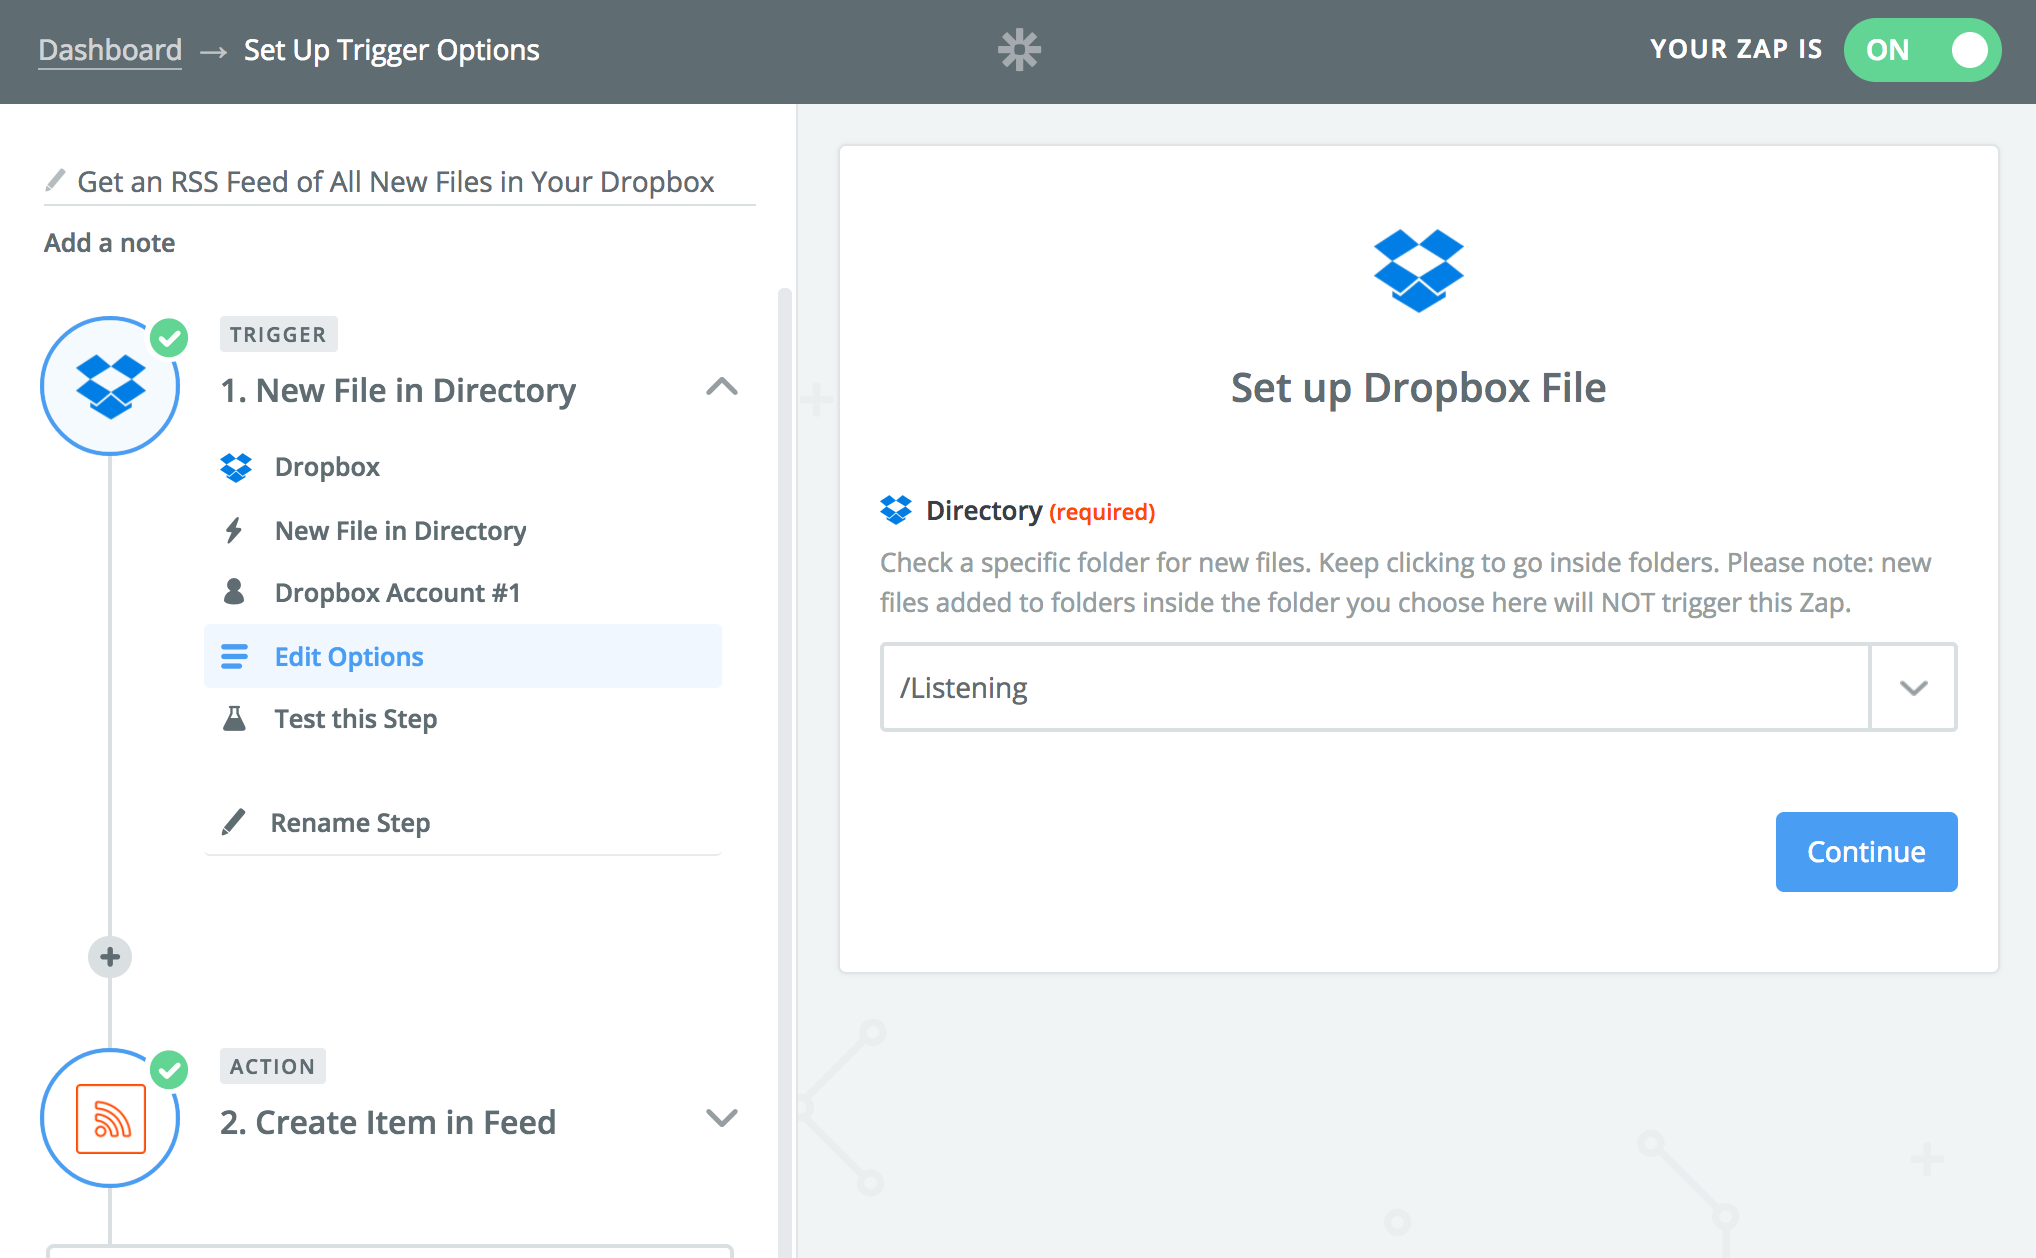 Dropbox trigger options: Directory is /Listening